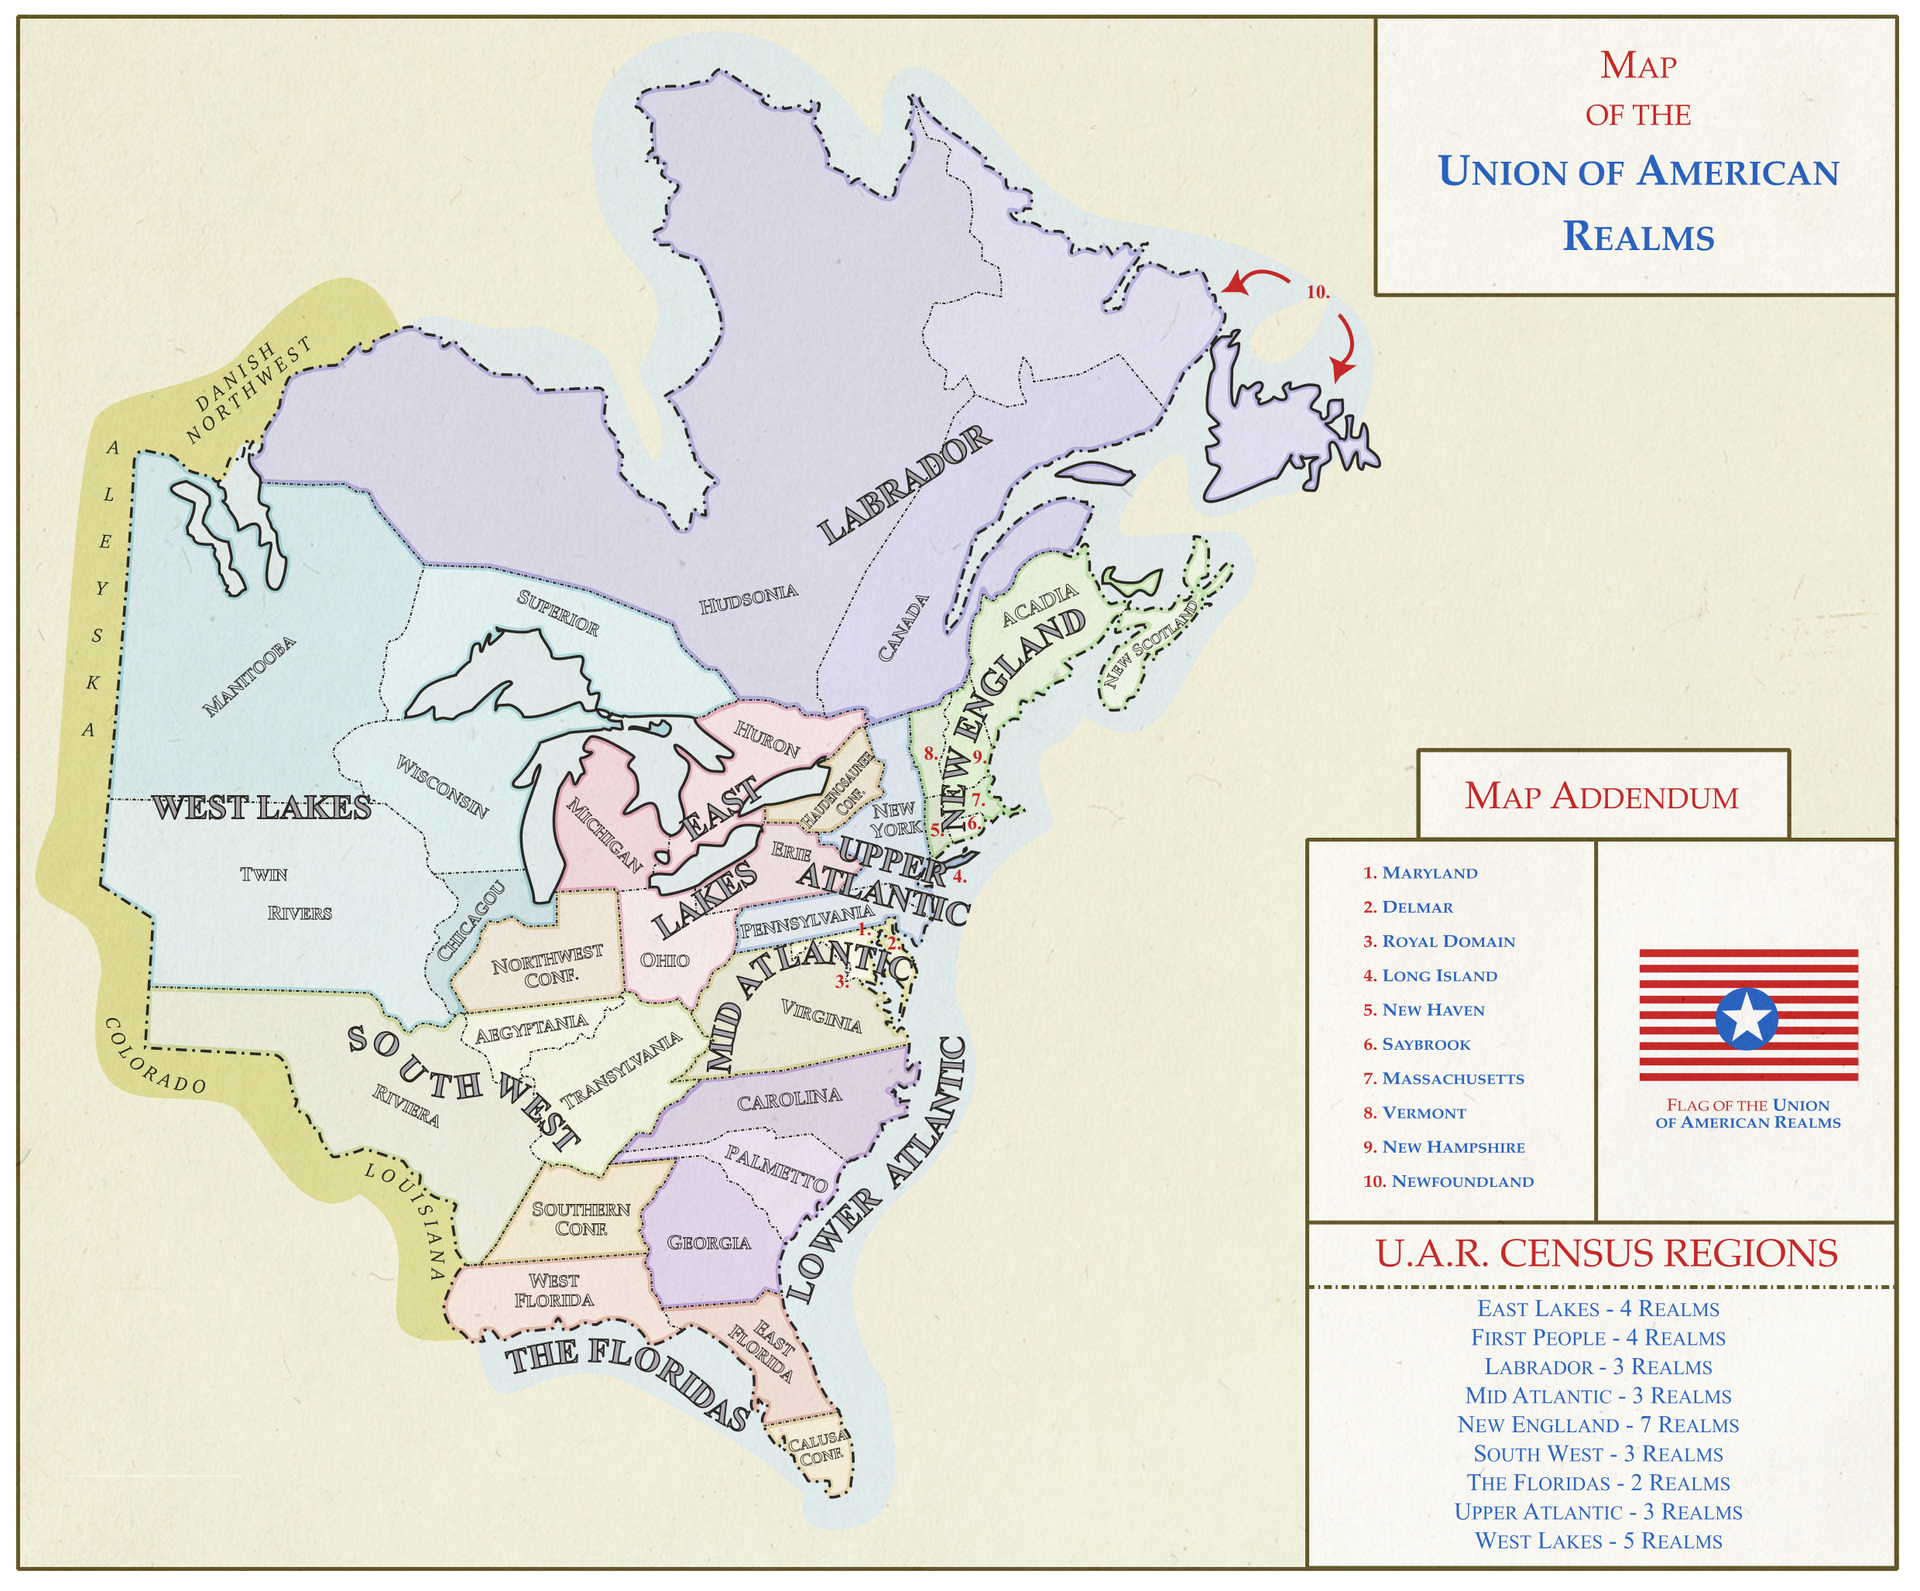 census_regions_of_the_union_of_american_realms_by_ozzysmapcorner_ddlme5l-fullview.png